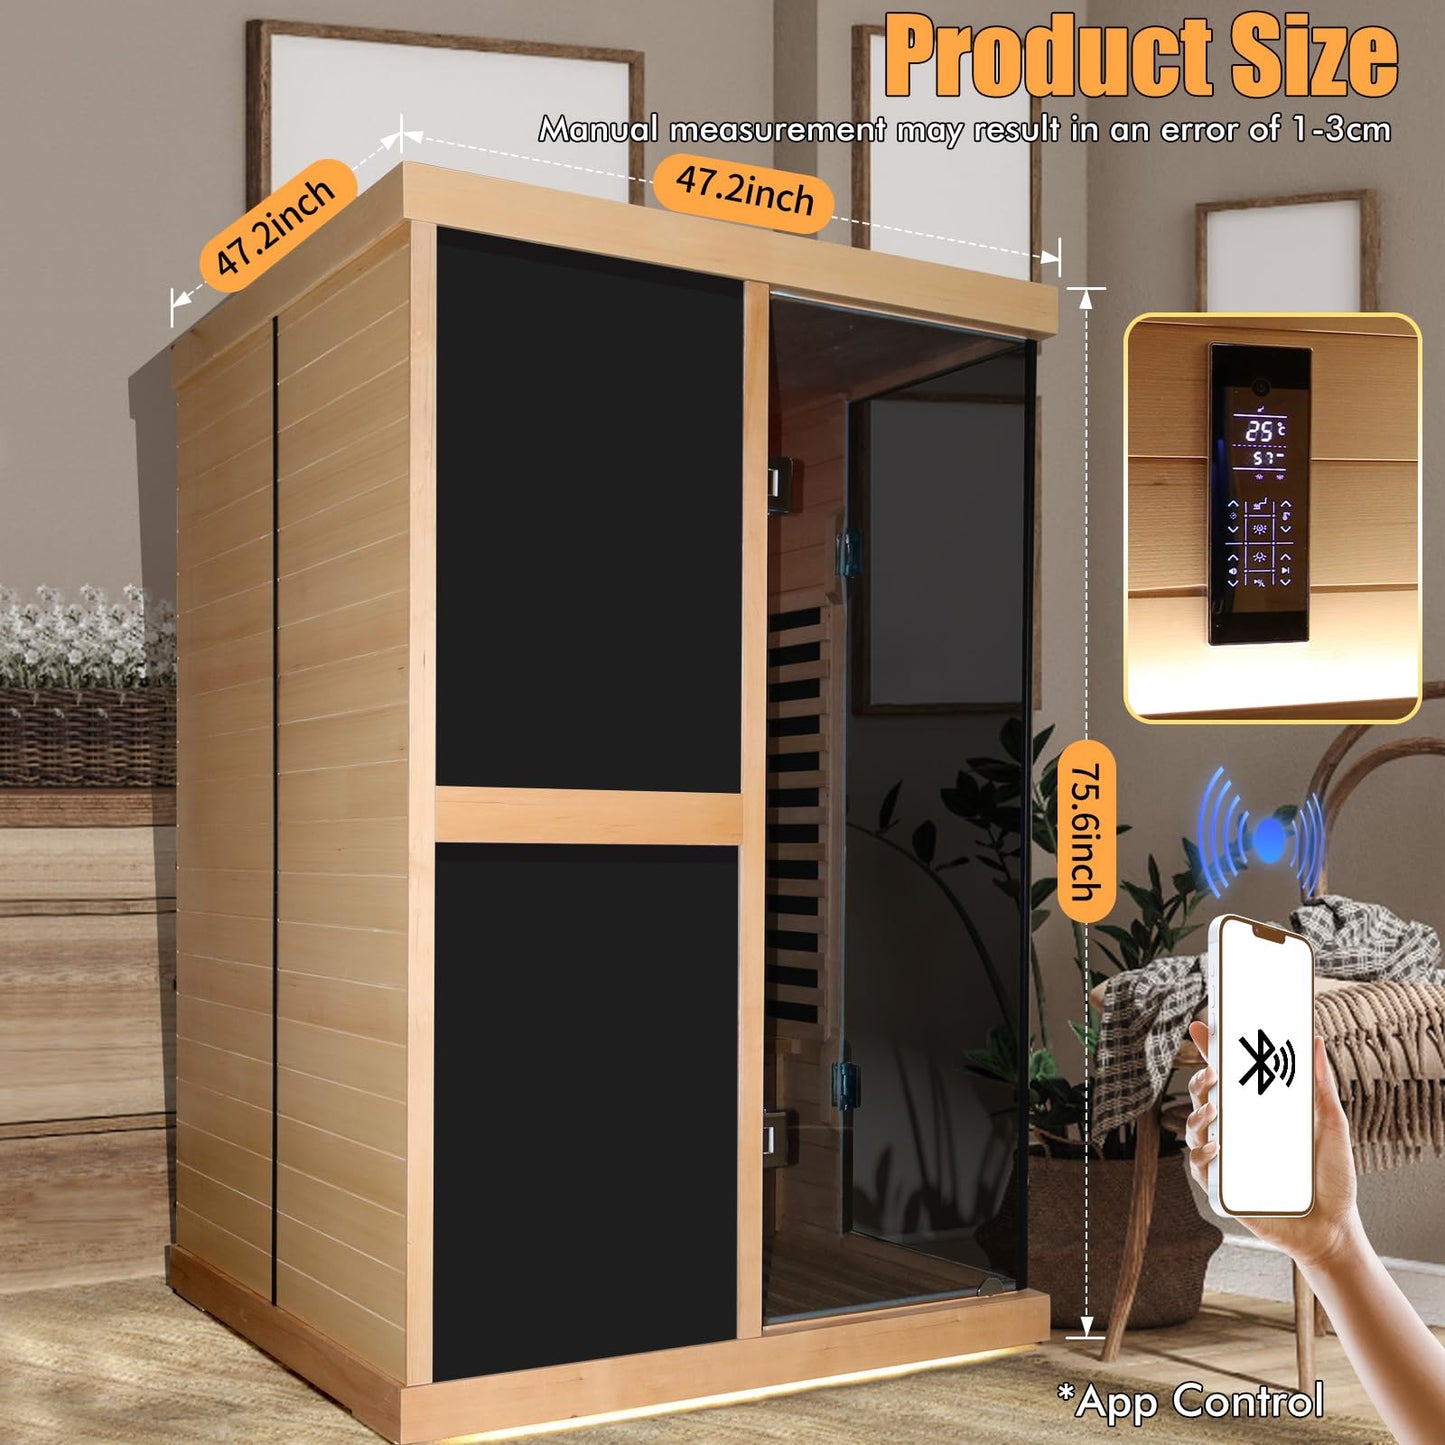 OUTEXER Infrared Sauna 1980W Wooden Saunas Home Spa Room Canadian Hemlock Wood Low-EMF Indoor Saunas with APP Control for Two Person